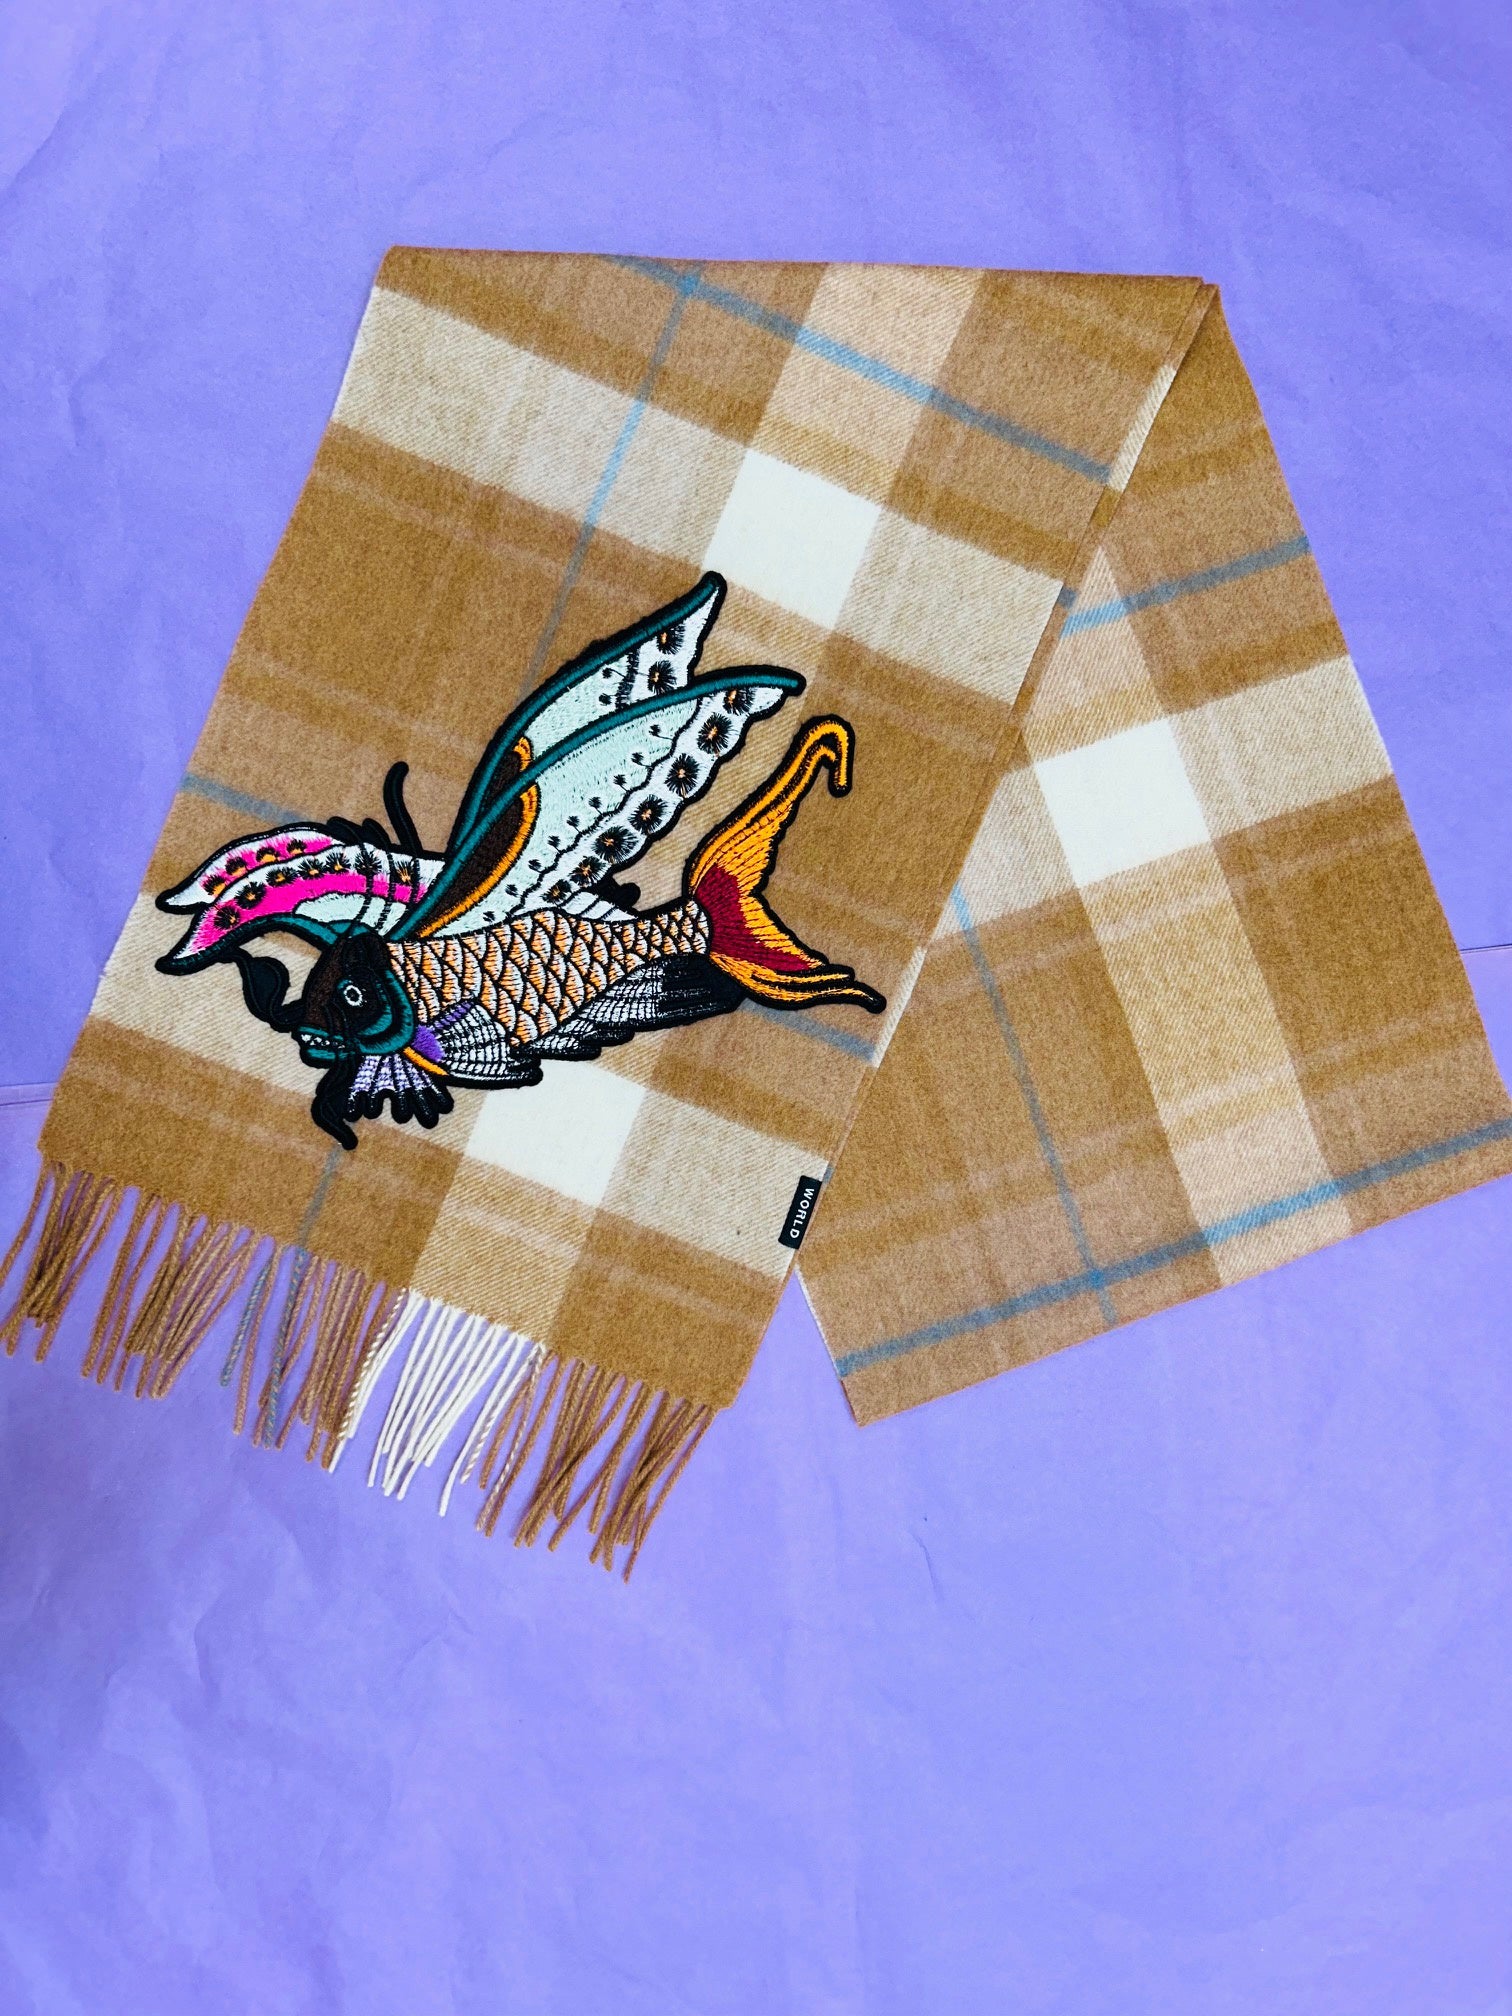 WORLD 24 Lambswool COUTURE Scarf - Tan Check w/Fish